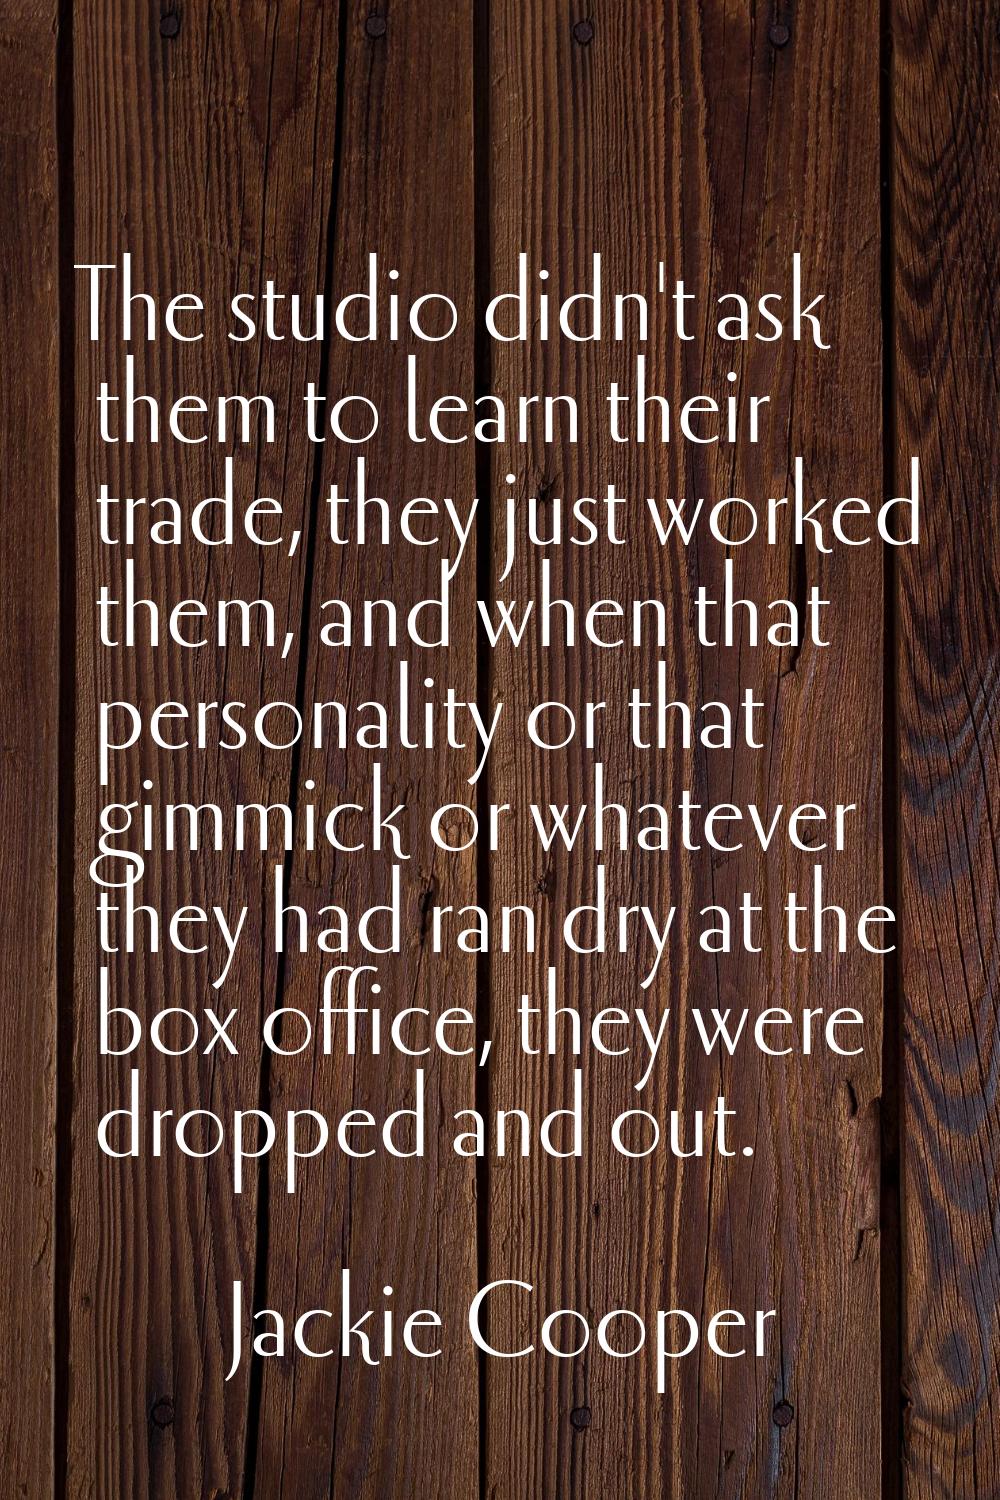 The studio didn't ask them to learn their trade, they just worked them, and when that personality o